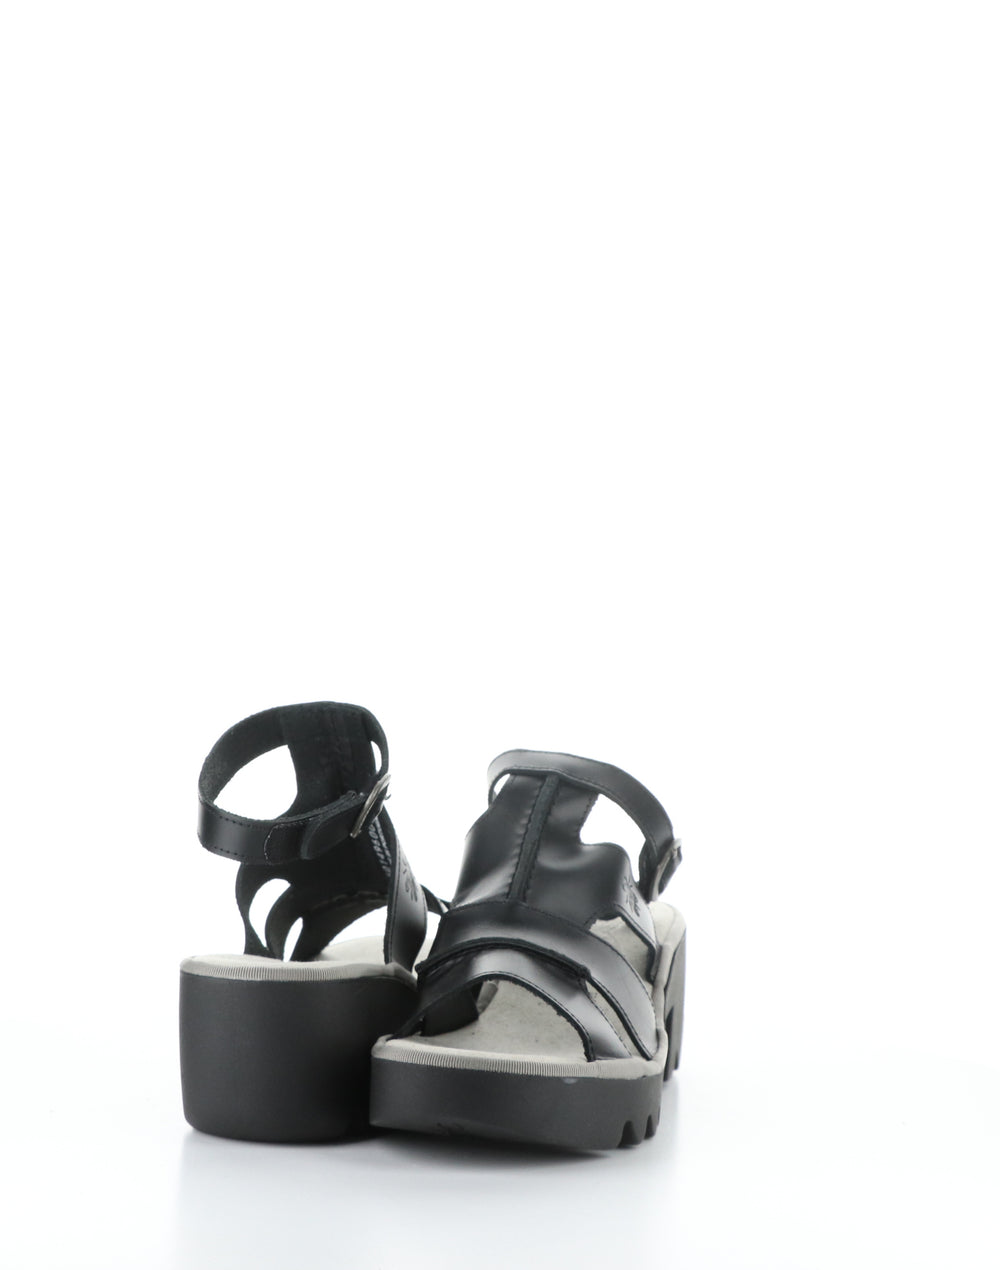 TAWI496FLY 000 BLACK Velcro Sandals